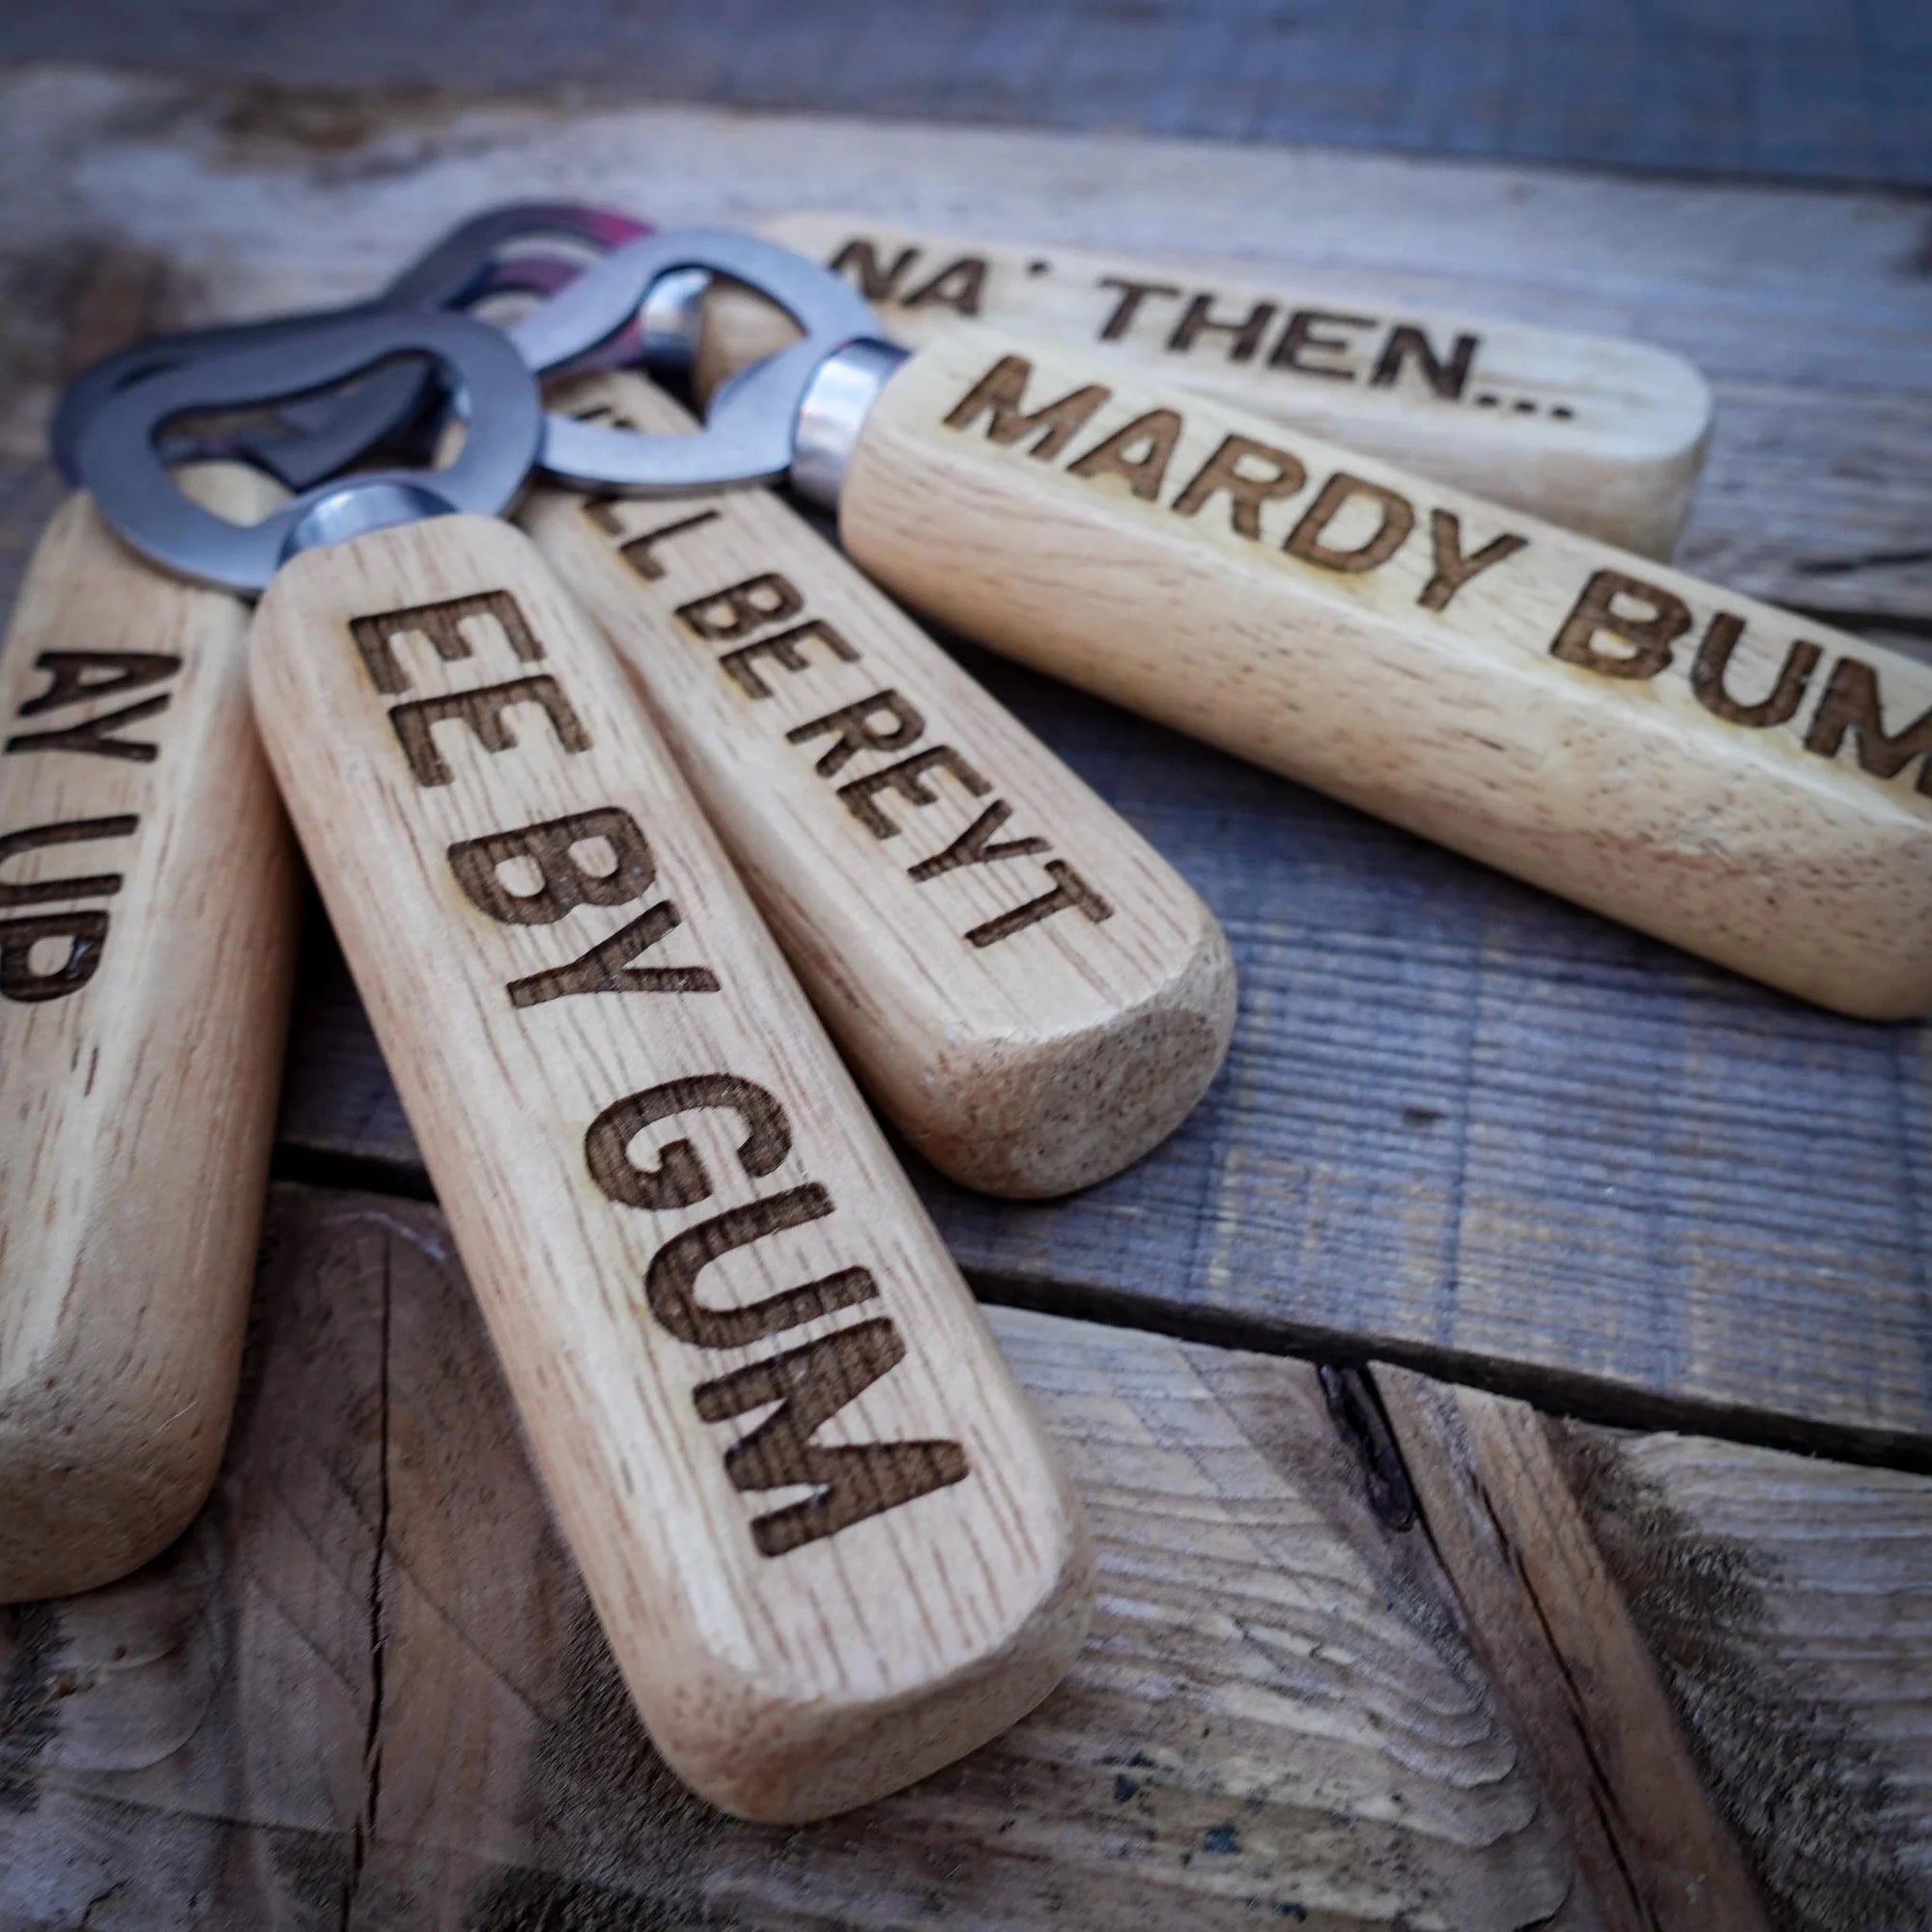 The Ultimate Yorkshire Companion: Introducing Our Yorkshire Sayings Bottle Openers